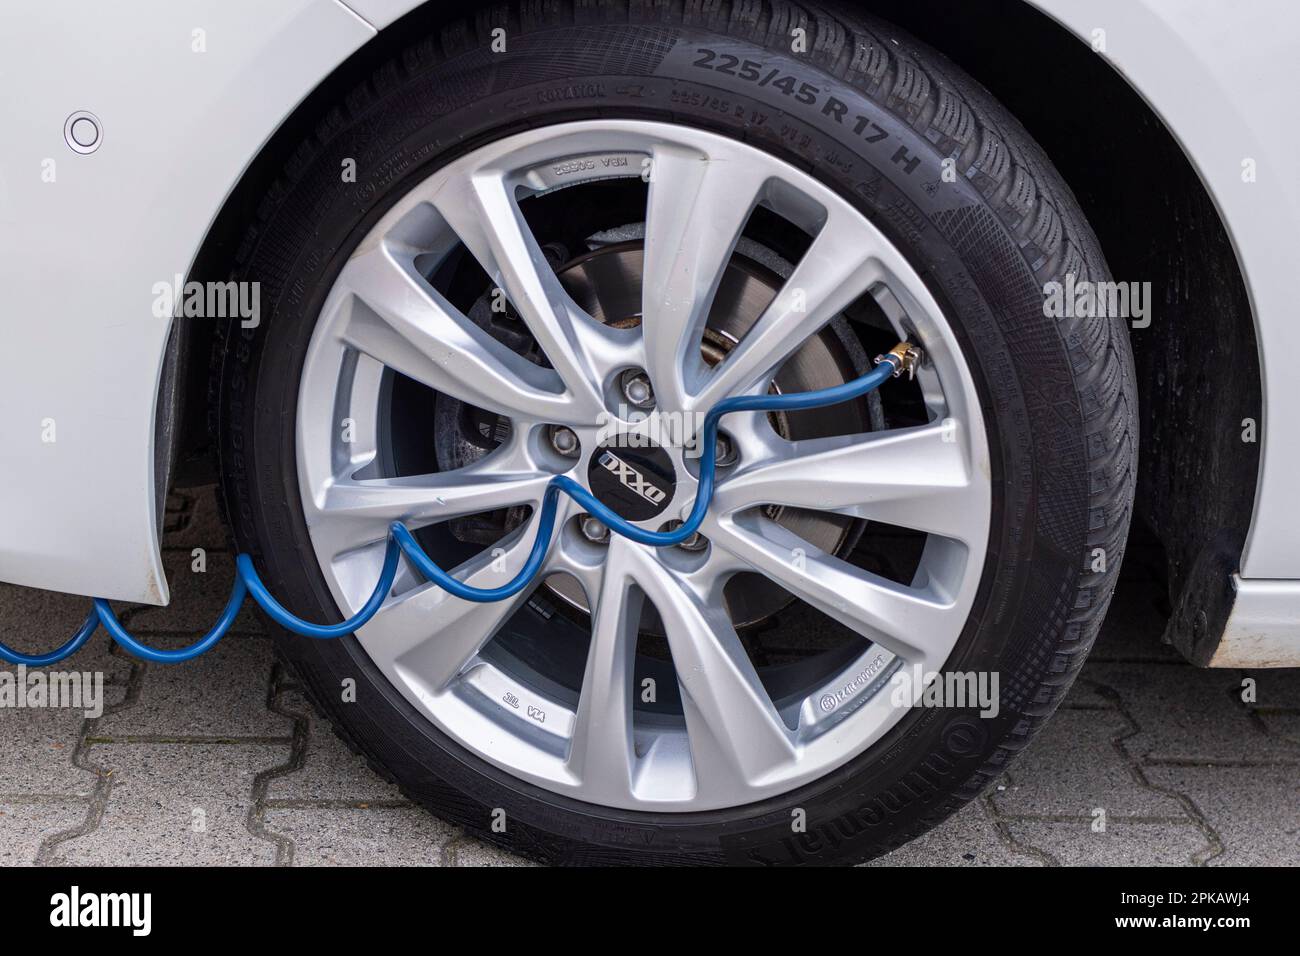 Gas station, check tire pressure, tire inflation tube with quick release, detail, icon image, check tire pressure, Stock Photo